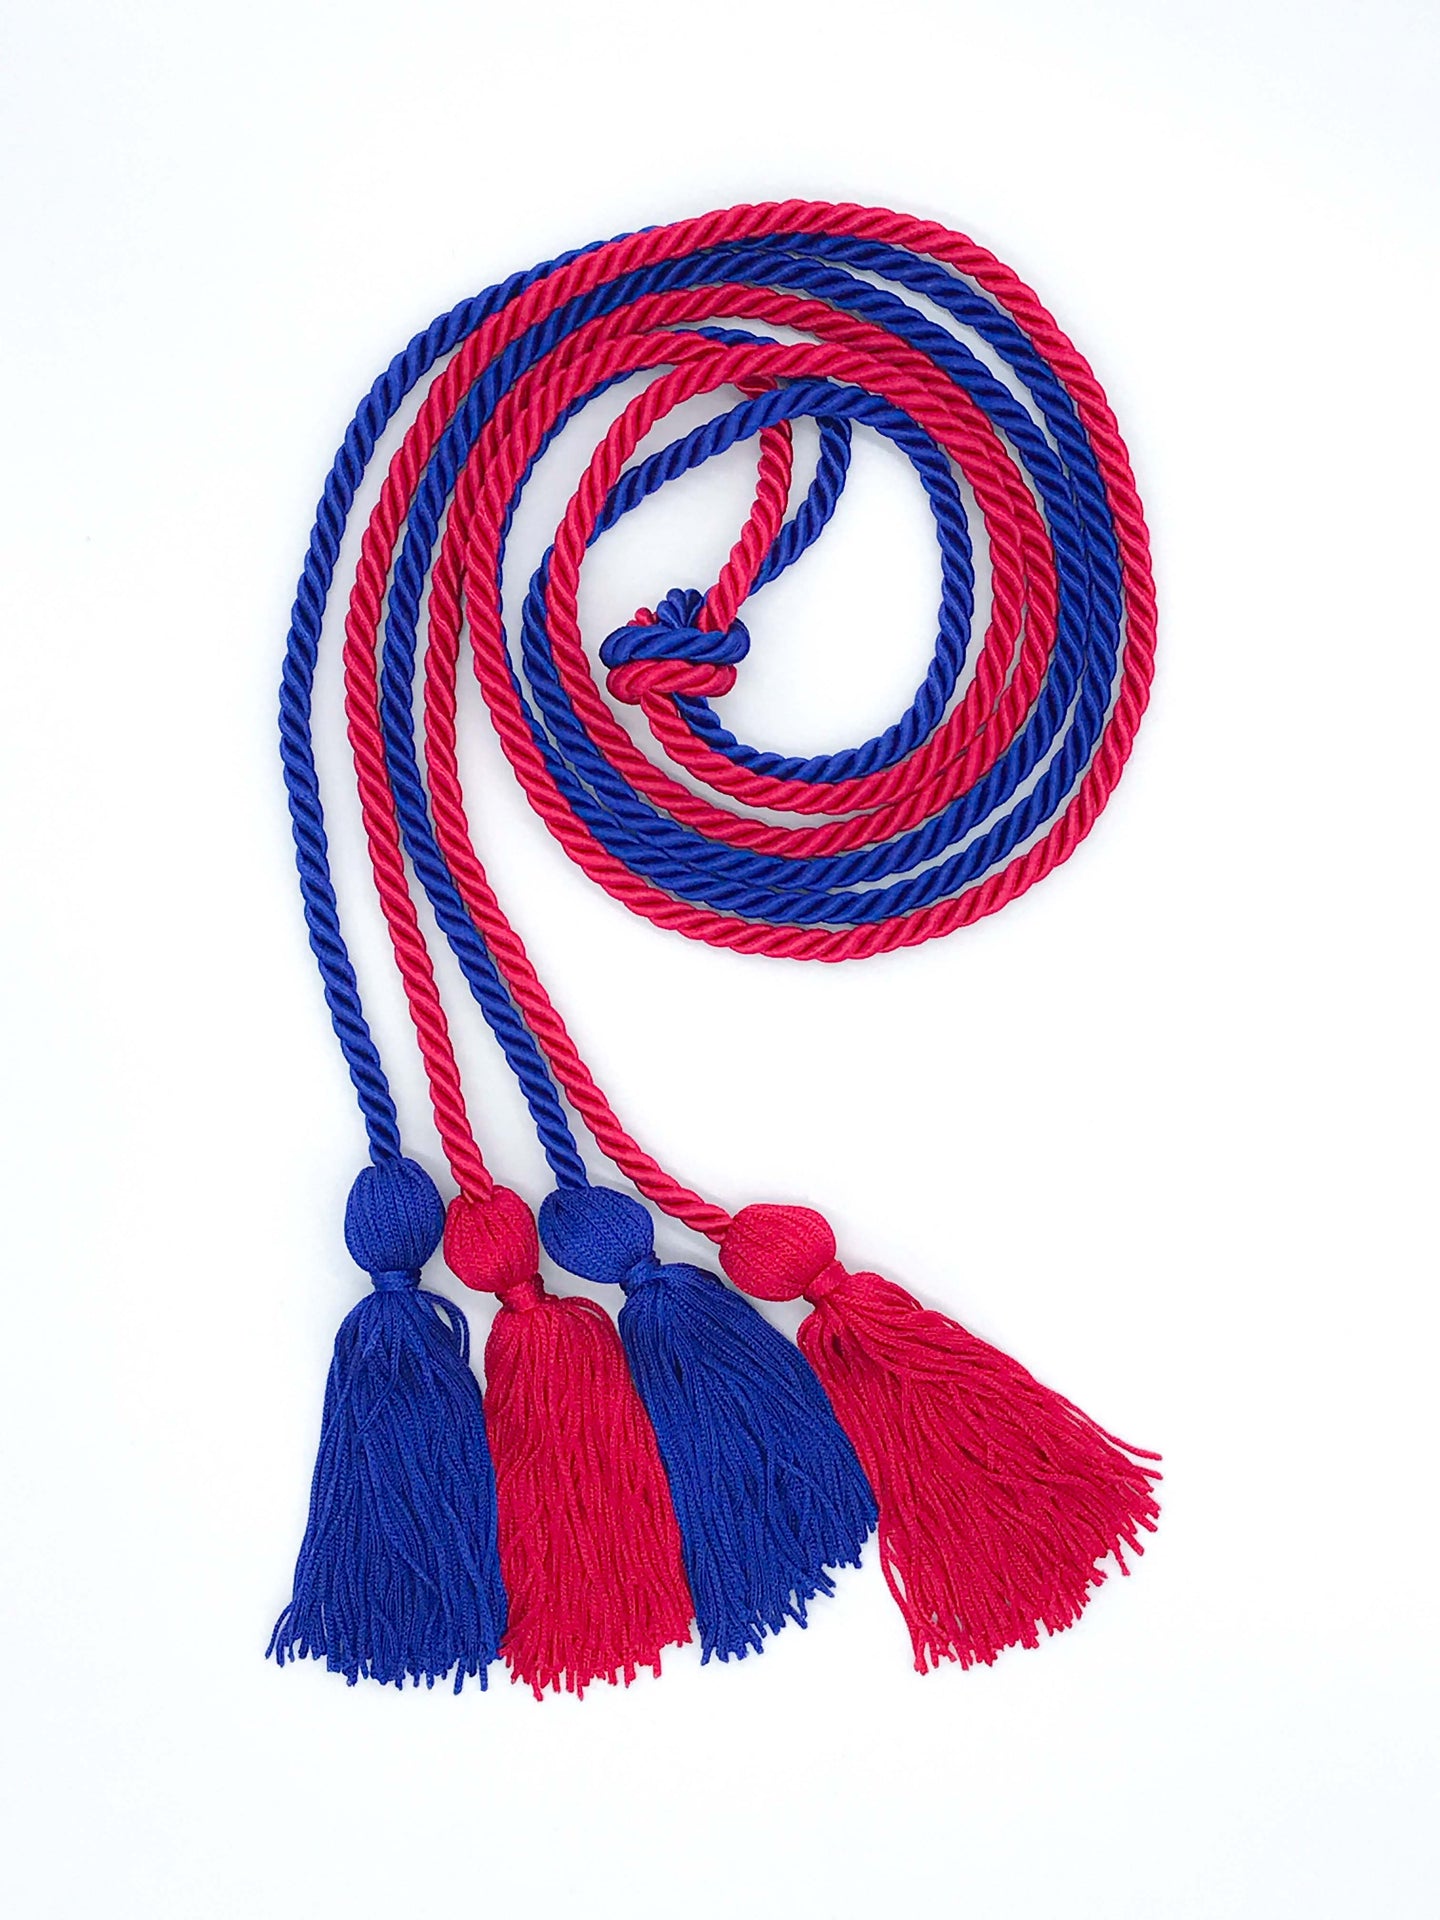 Dual Colored Honor Cords